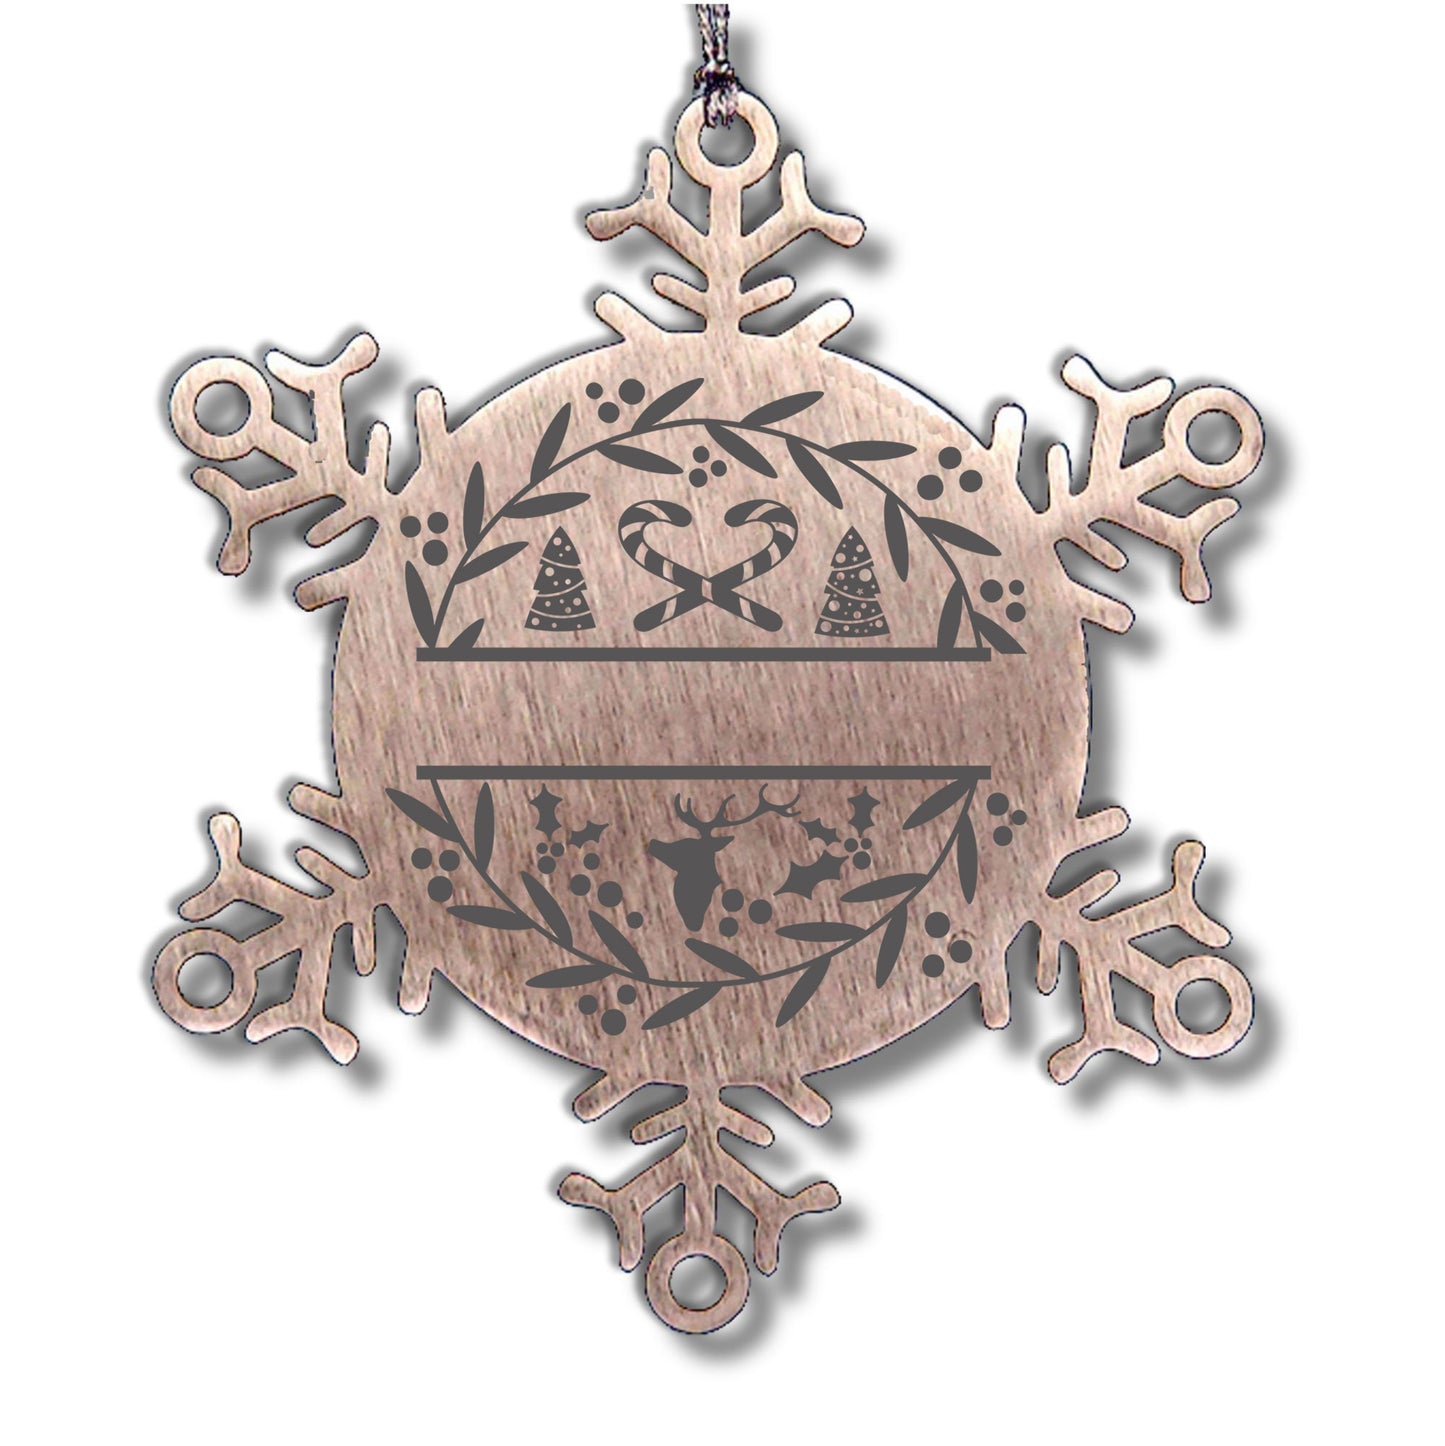 Personalized Family Name Laser Engraved Stainless Steel Snowflake Tree Ornament Candy Canes